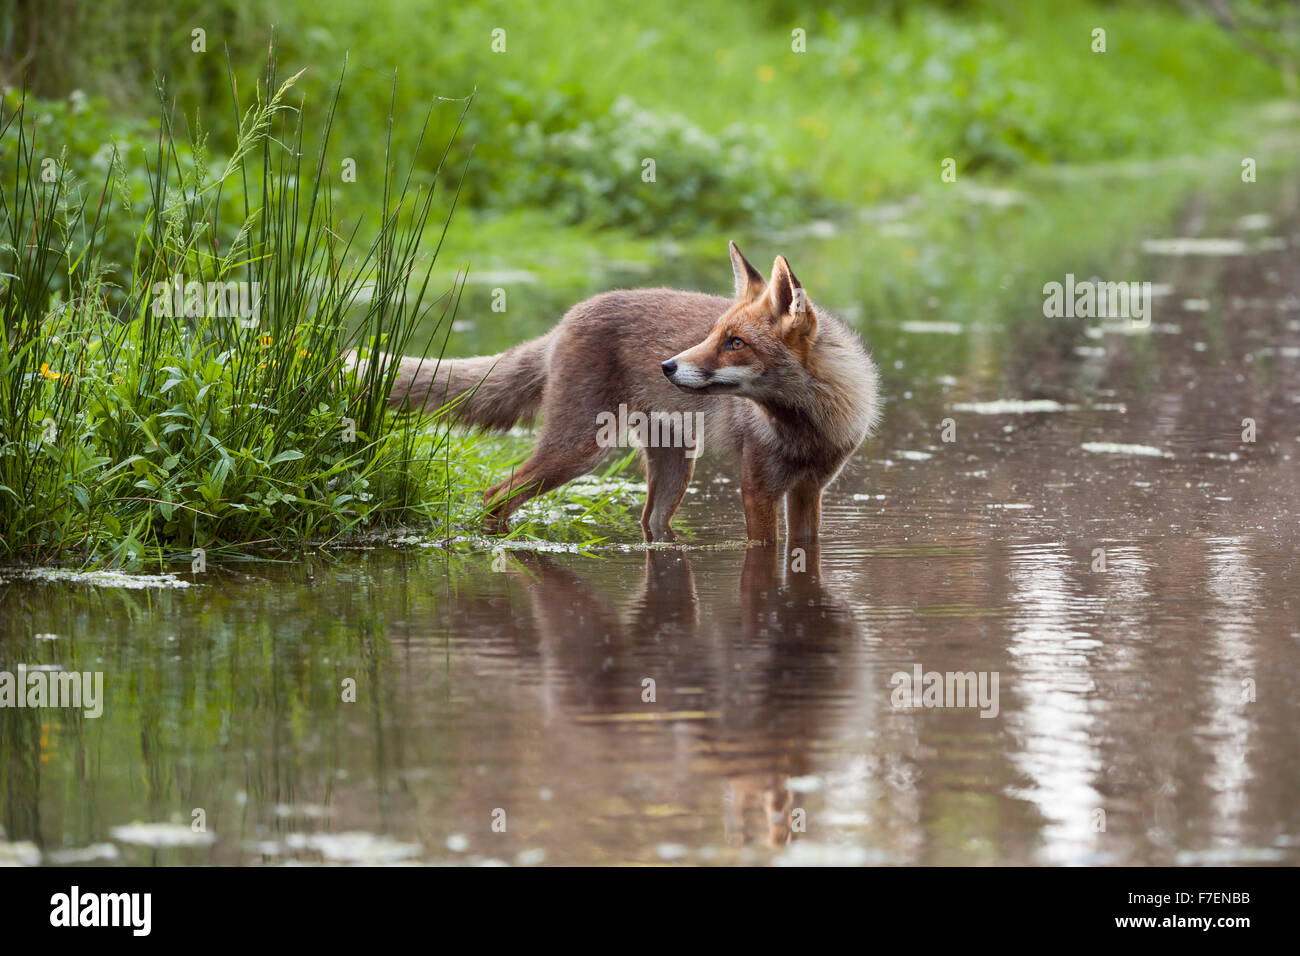 Red Fox / Rotfuchs ( Vulpes vulpes ) stands in shallow water, looks back, surrounded by high fresh green vegetation. Stock Photo